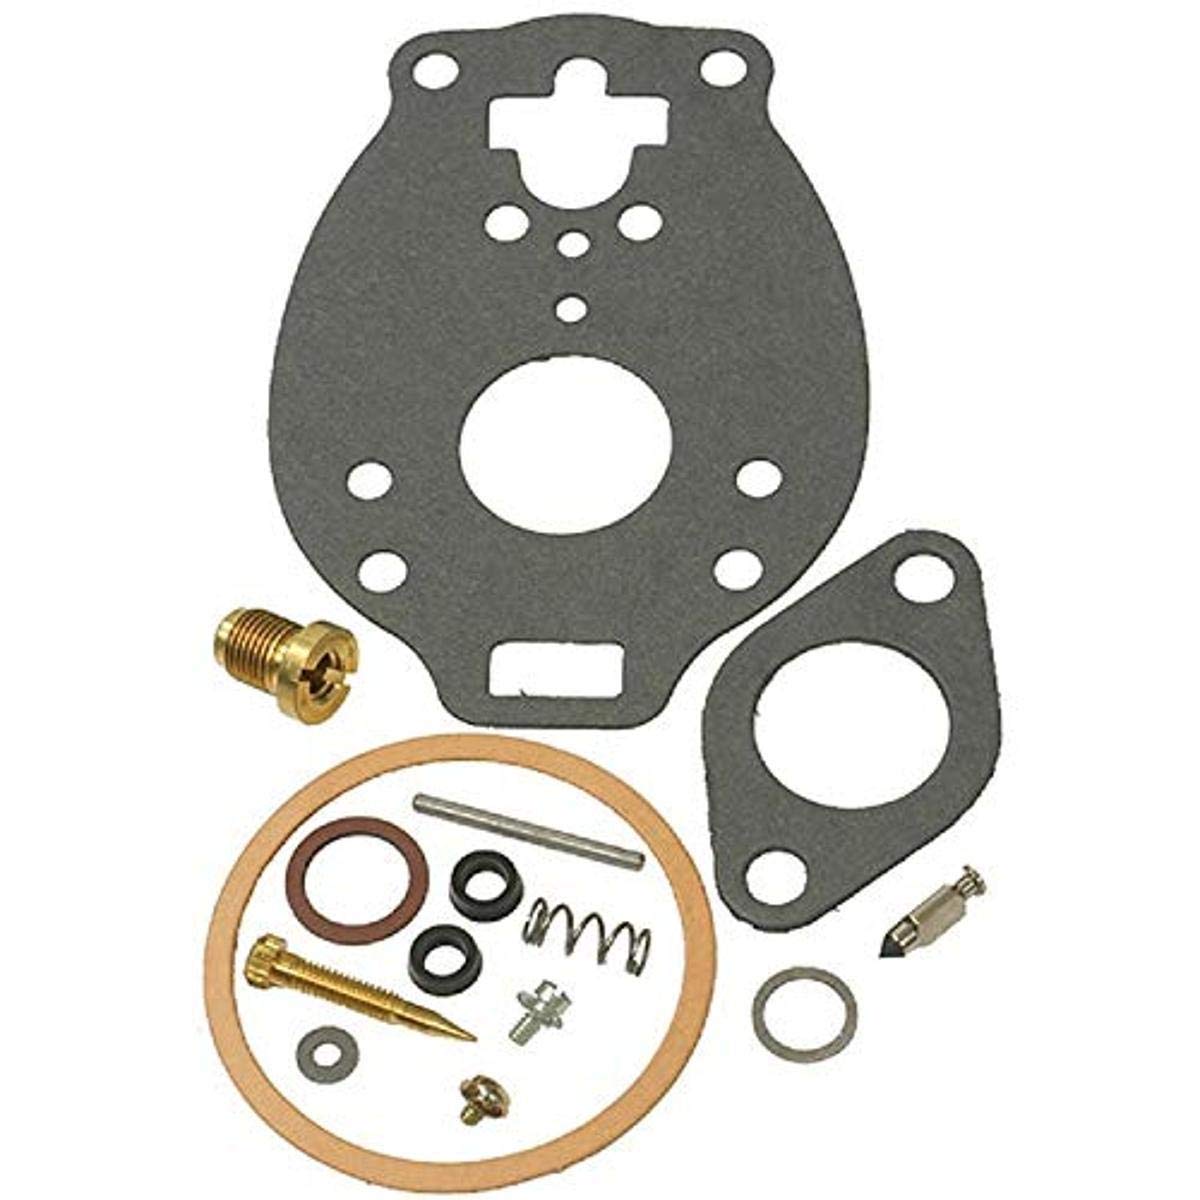 DB Electrical ZFS-K7516 Repair Kit Compatible with/Replacement for Marvel-Schebler Carburetors